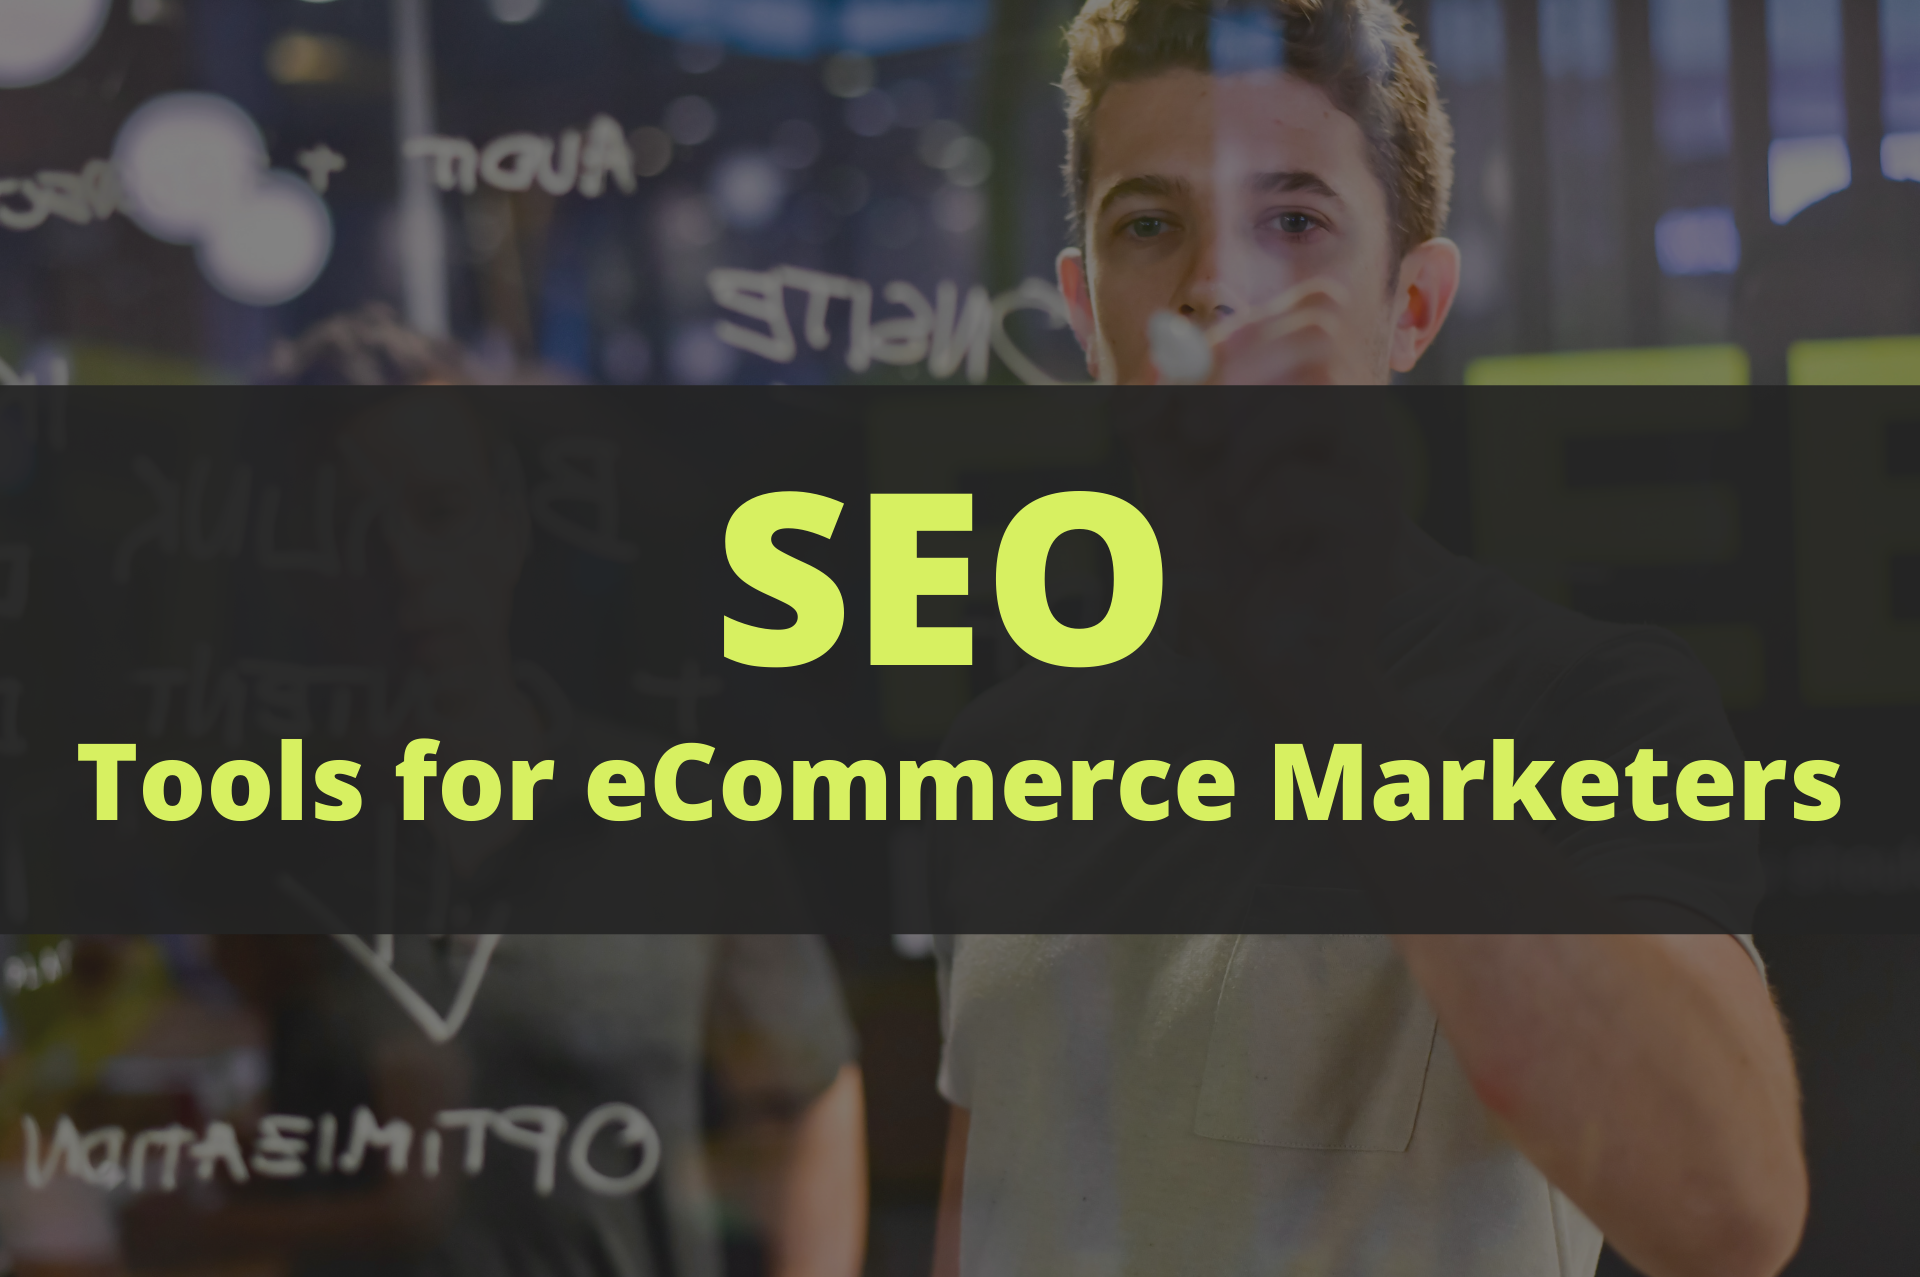 SEO Tools for eCommerce Marketers - Man in casual attire brainstorming on a board